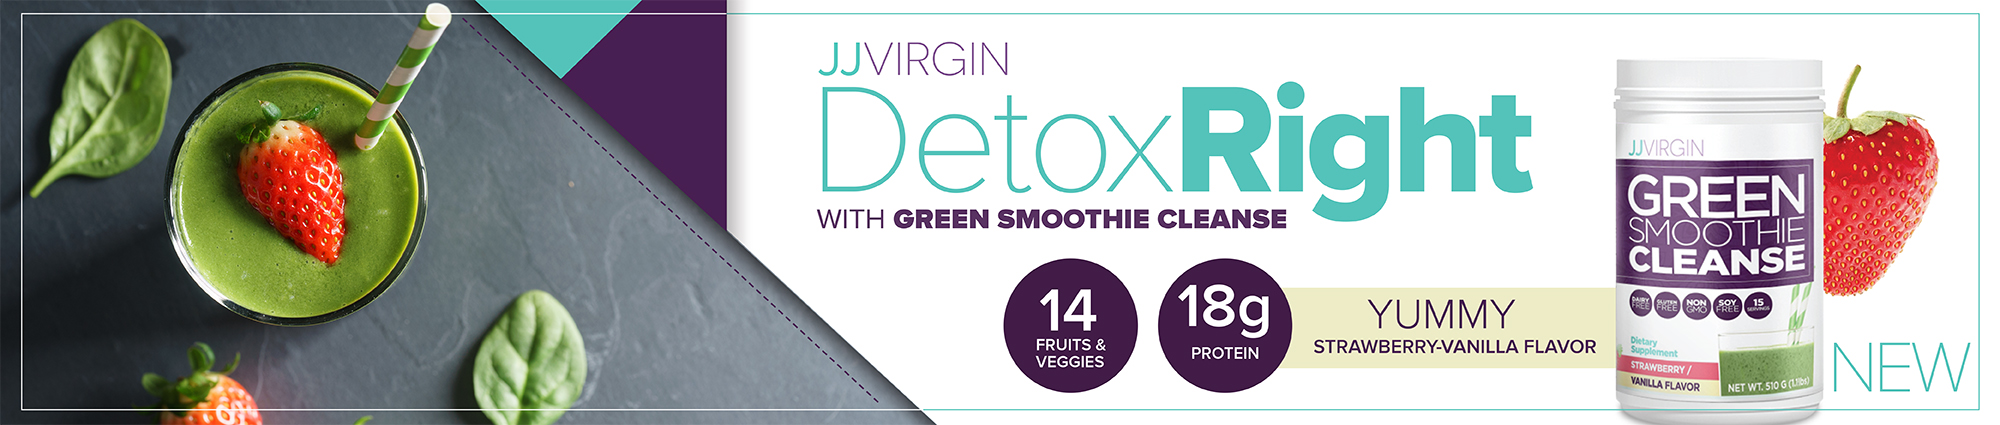 Detox done right! Green Smoothie Clanse has 18g protein/serving & 14 fruits and veggies...